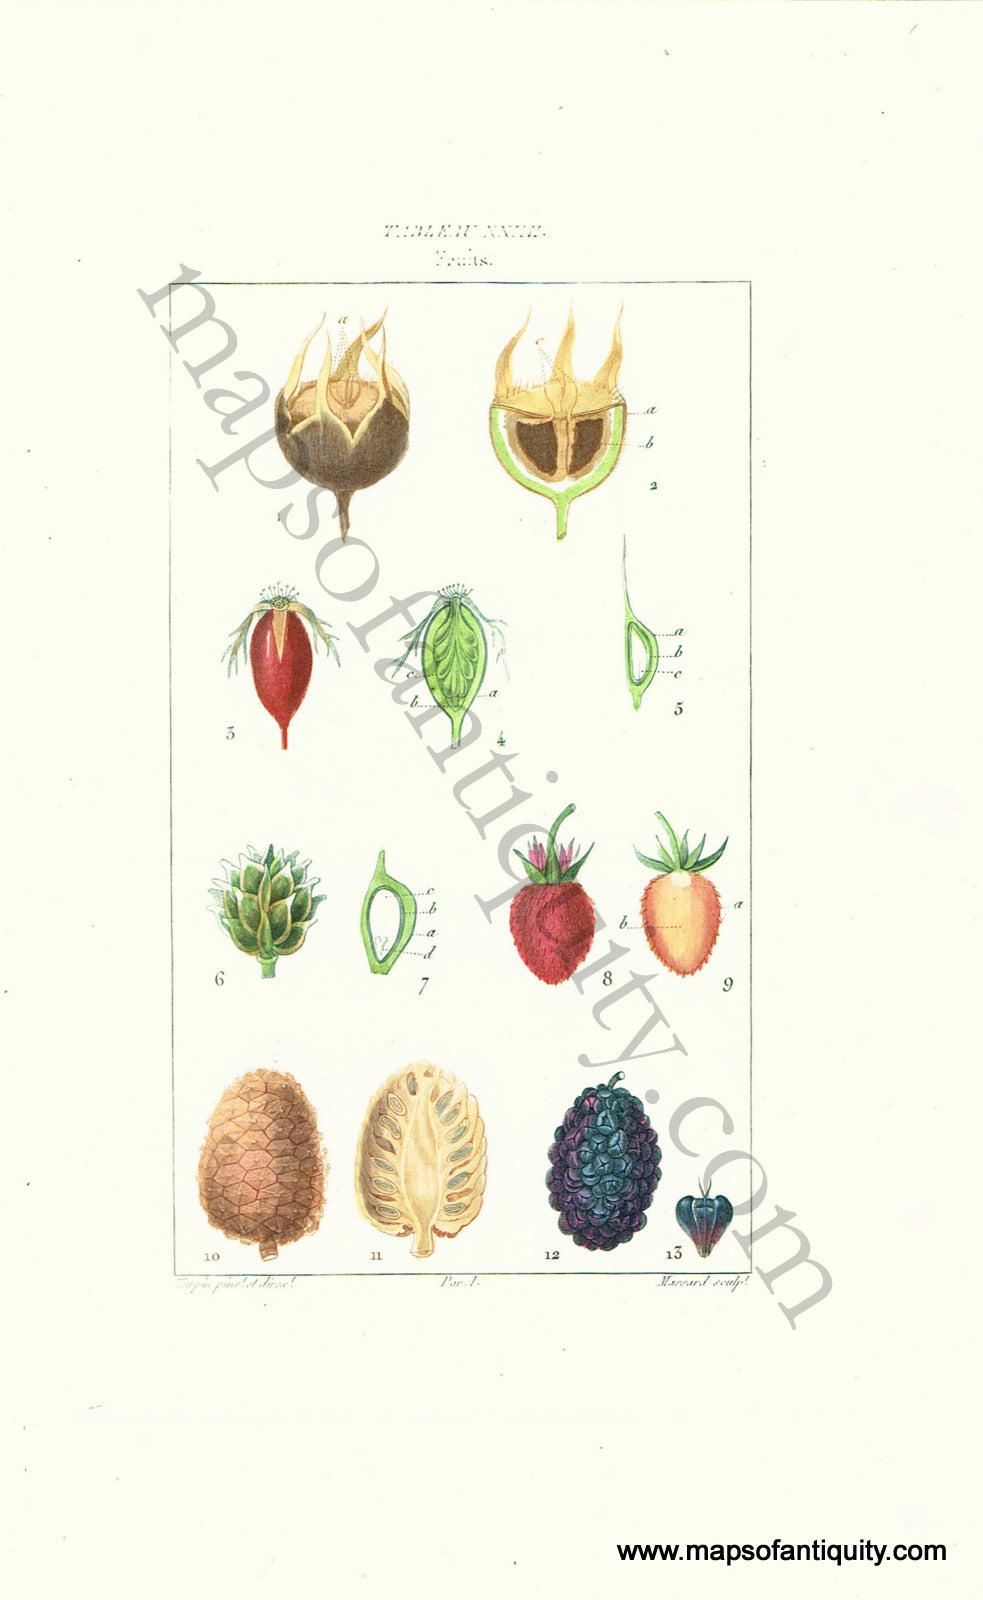 Antique-Hand-Colored-Lithograph-Fruits-Antique-Prints-Natural-History-Fruit-1841-Turpin-Maps-Of-Antiquity